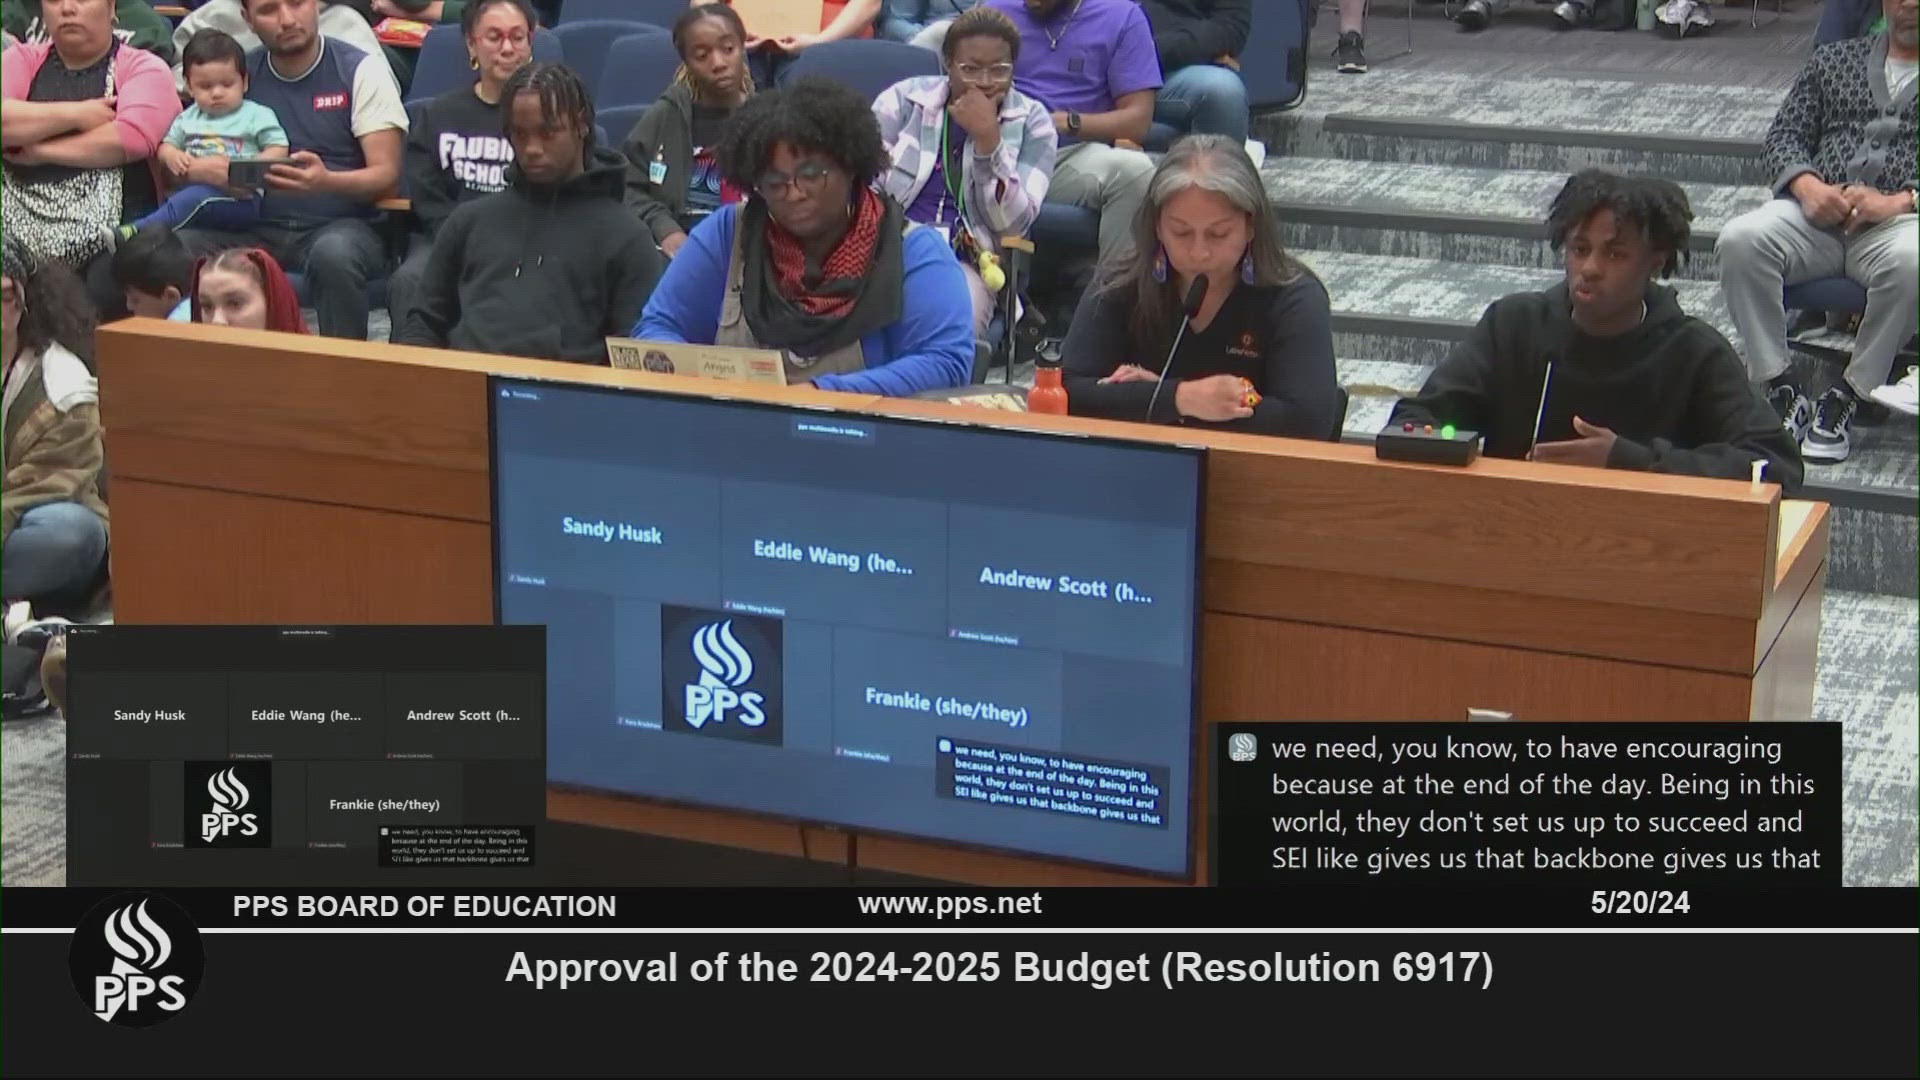 The board voted to approve budget cuts for the upcoming school year as well as restore funding to "equity programs."